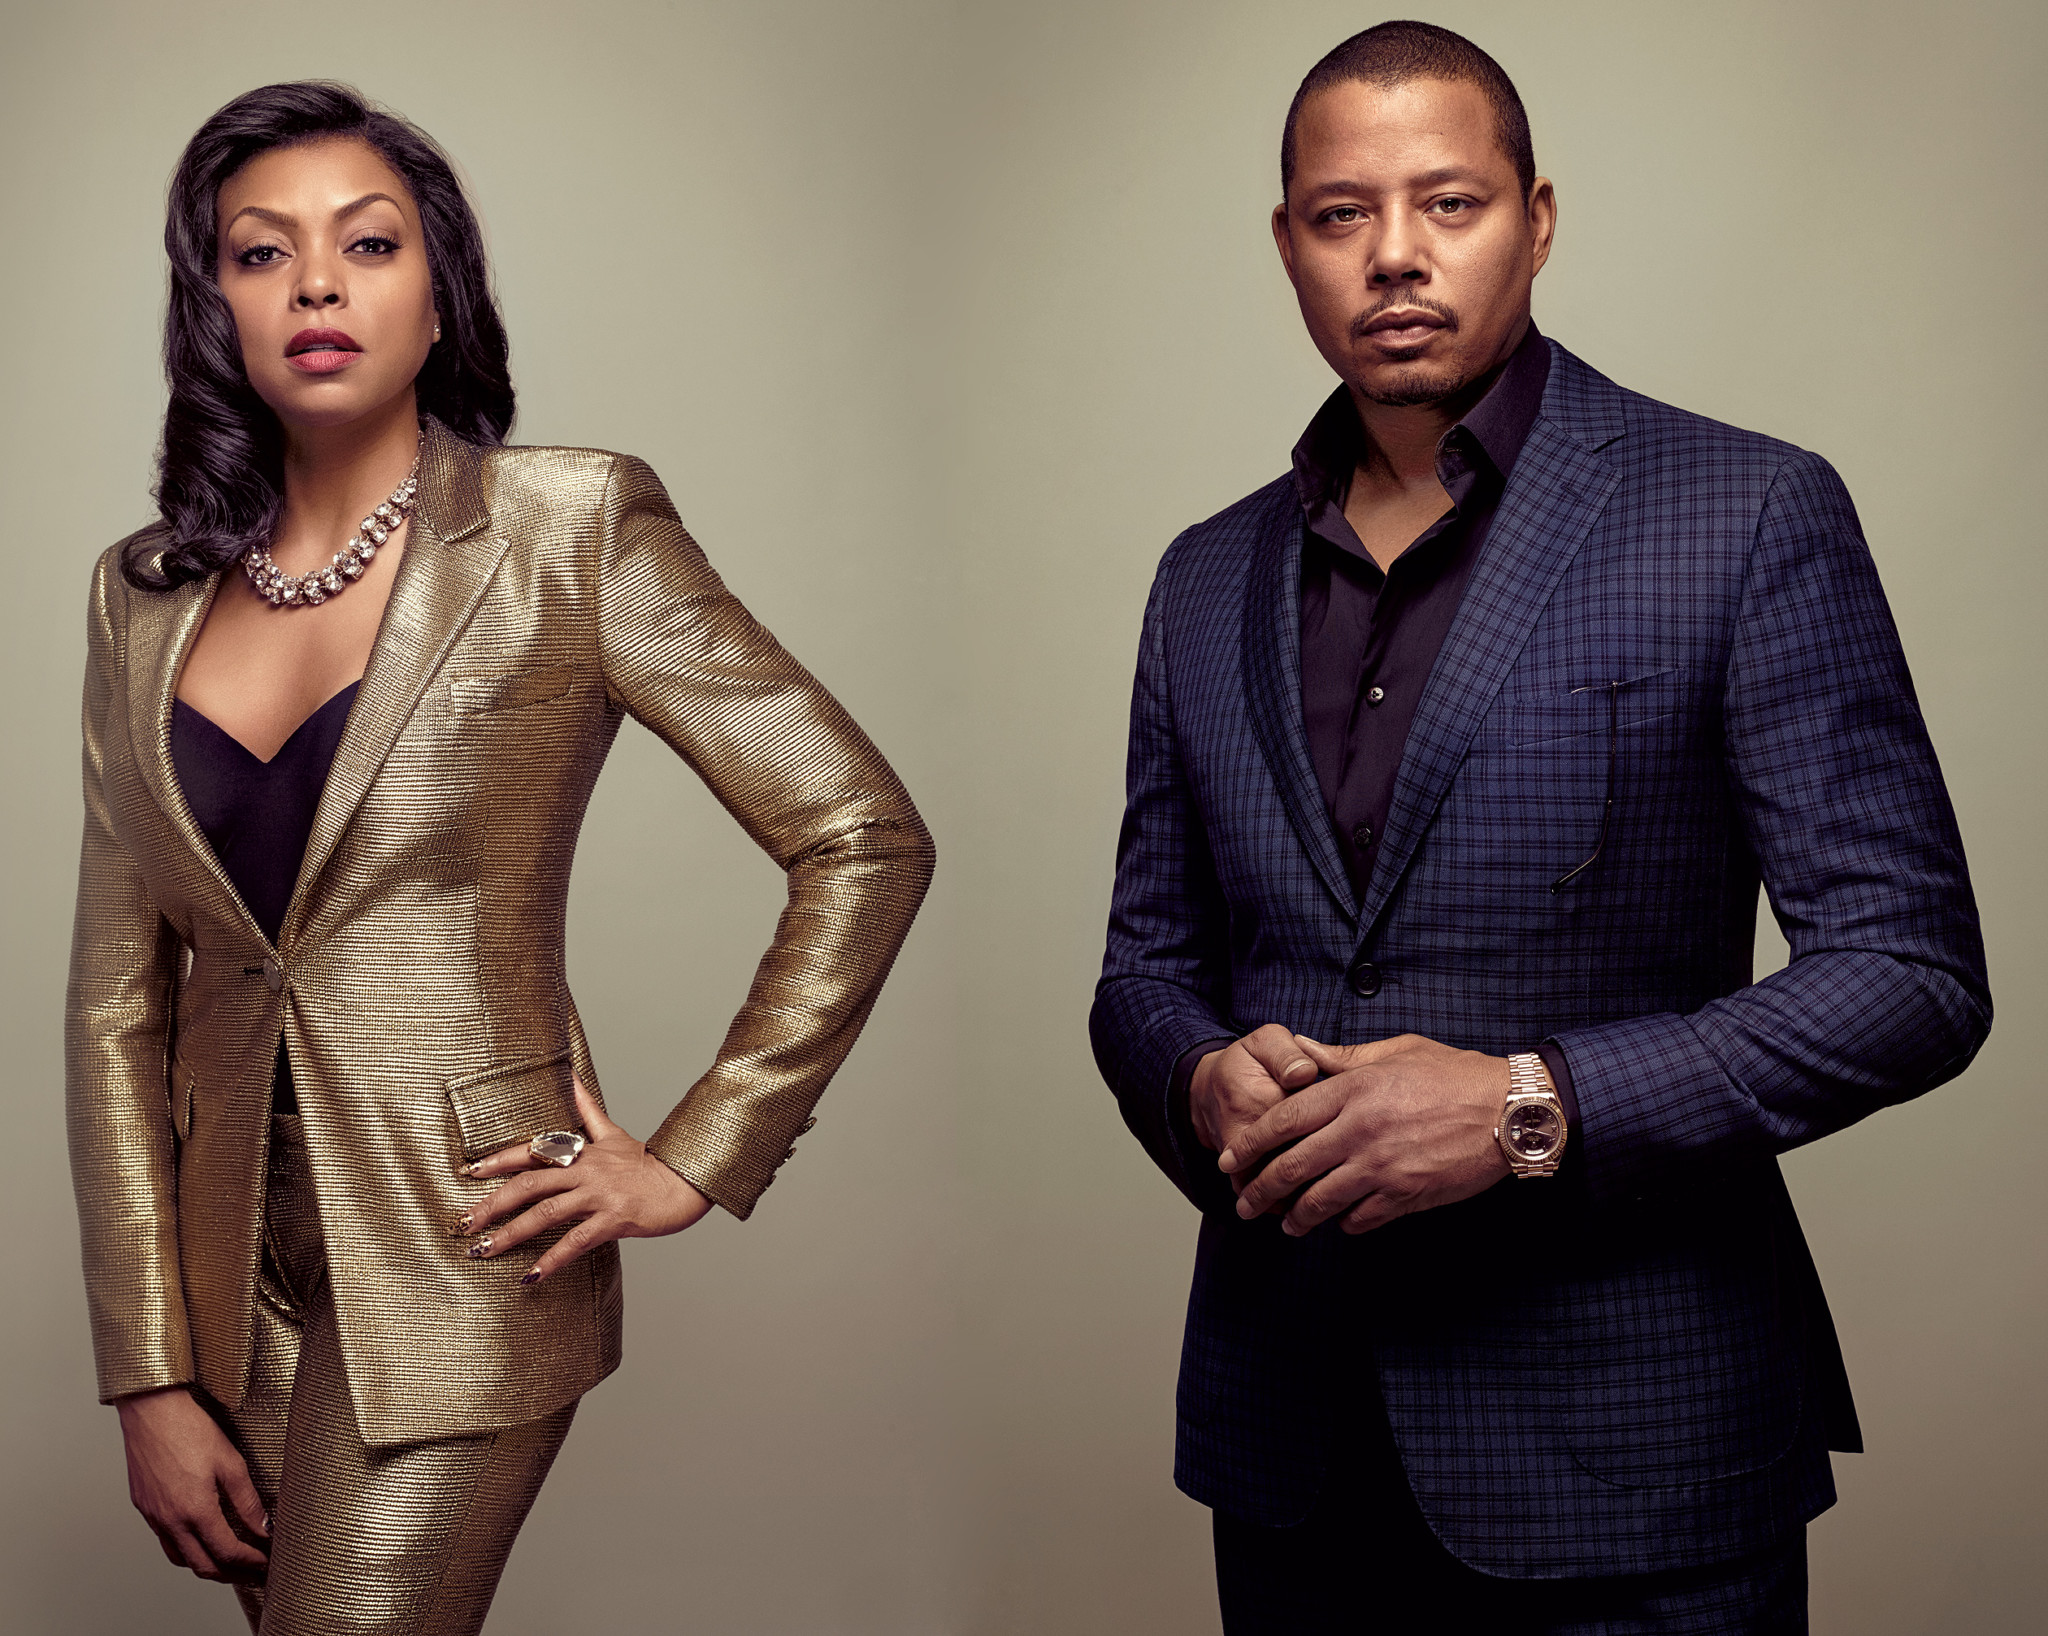 Why 'Empire's Taraji P. Henson and Terrence Howard Are the Most